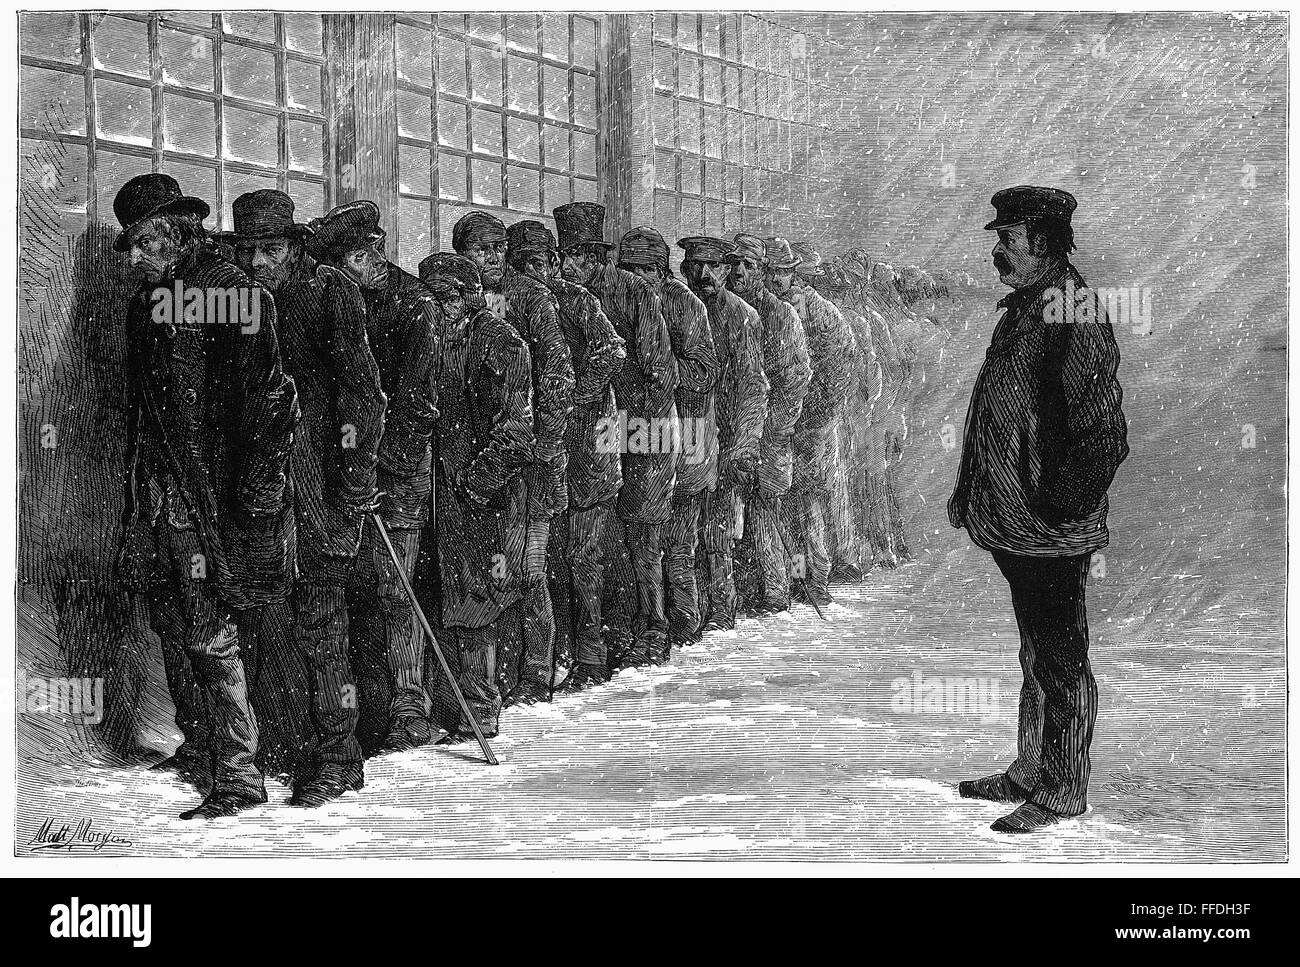 NEW YORK: POORHOUSE, 1875. /nA line of men wait in the snow for dinner at the poorhouse on Randall's Island in the East River. Wood engraving, American, February 1875. Stock Photo